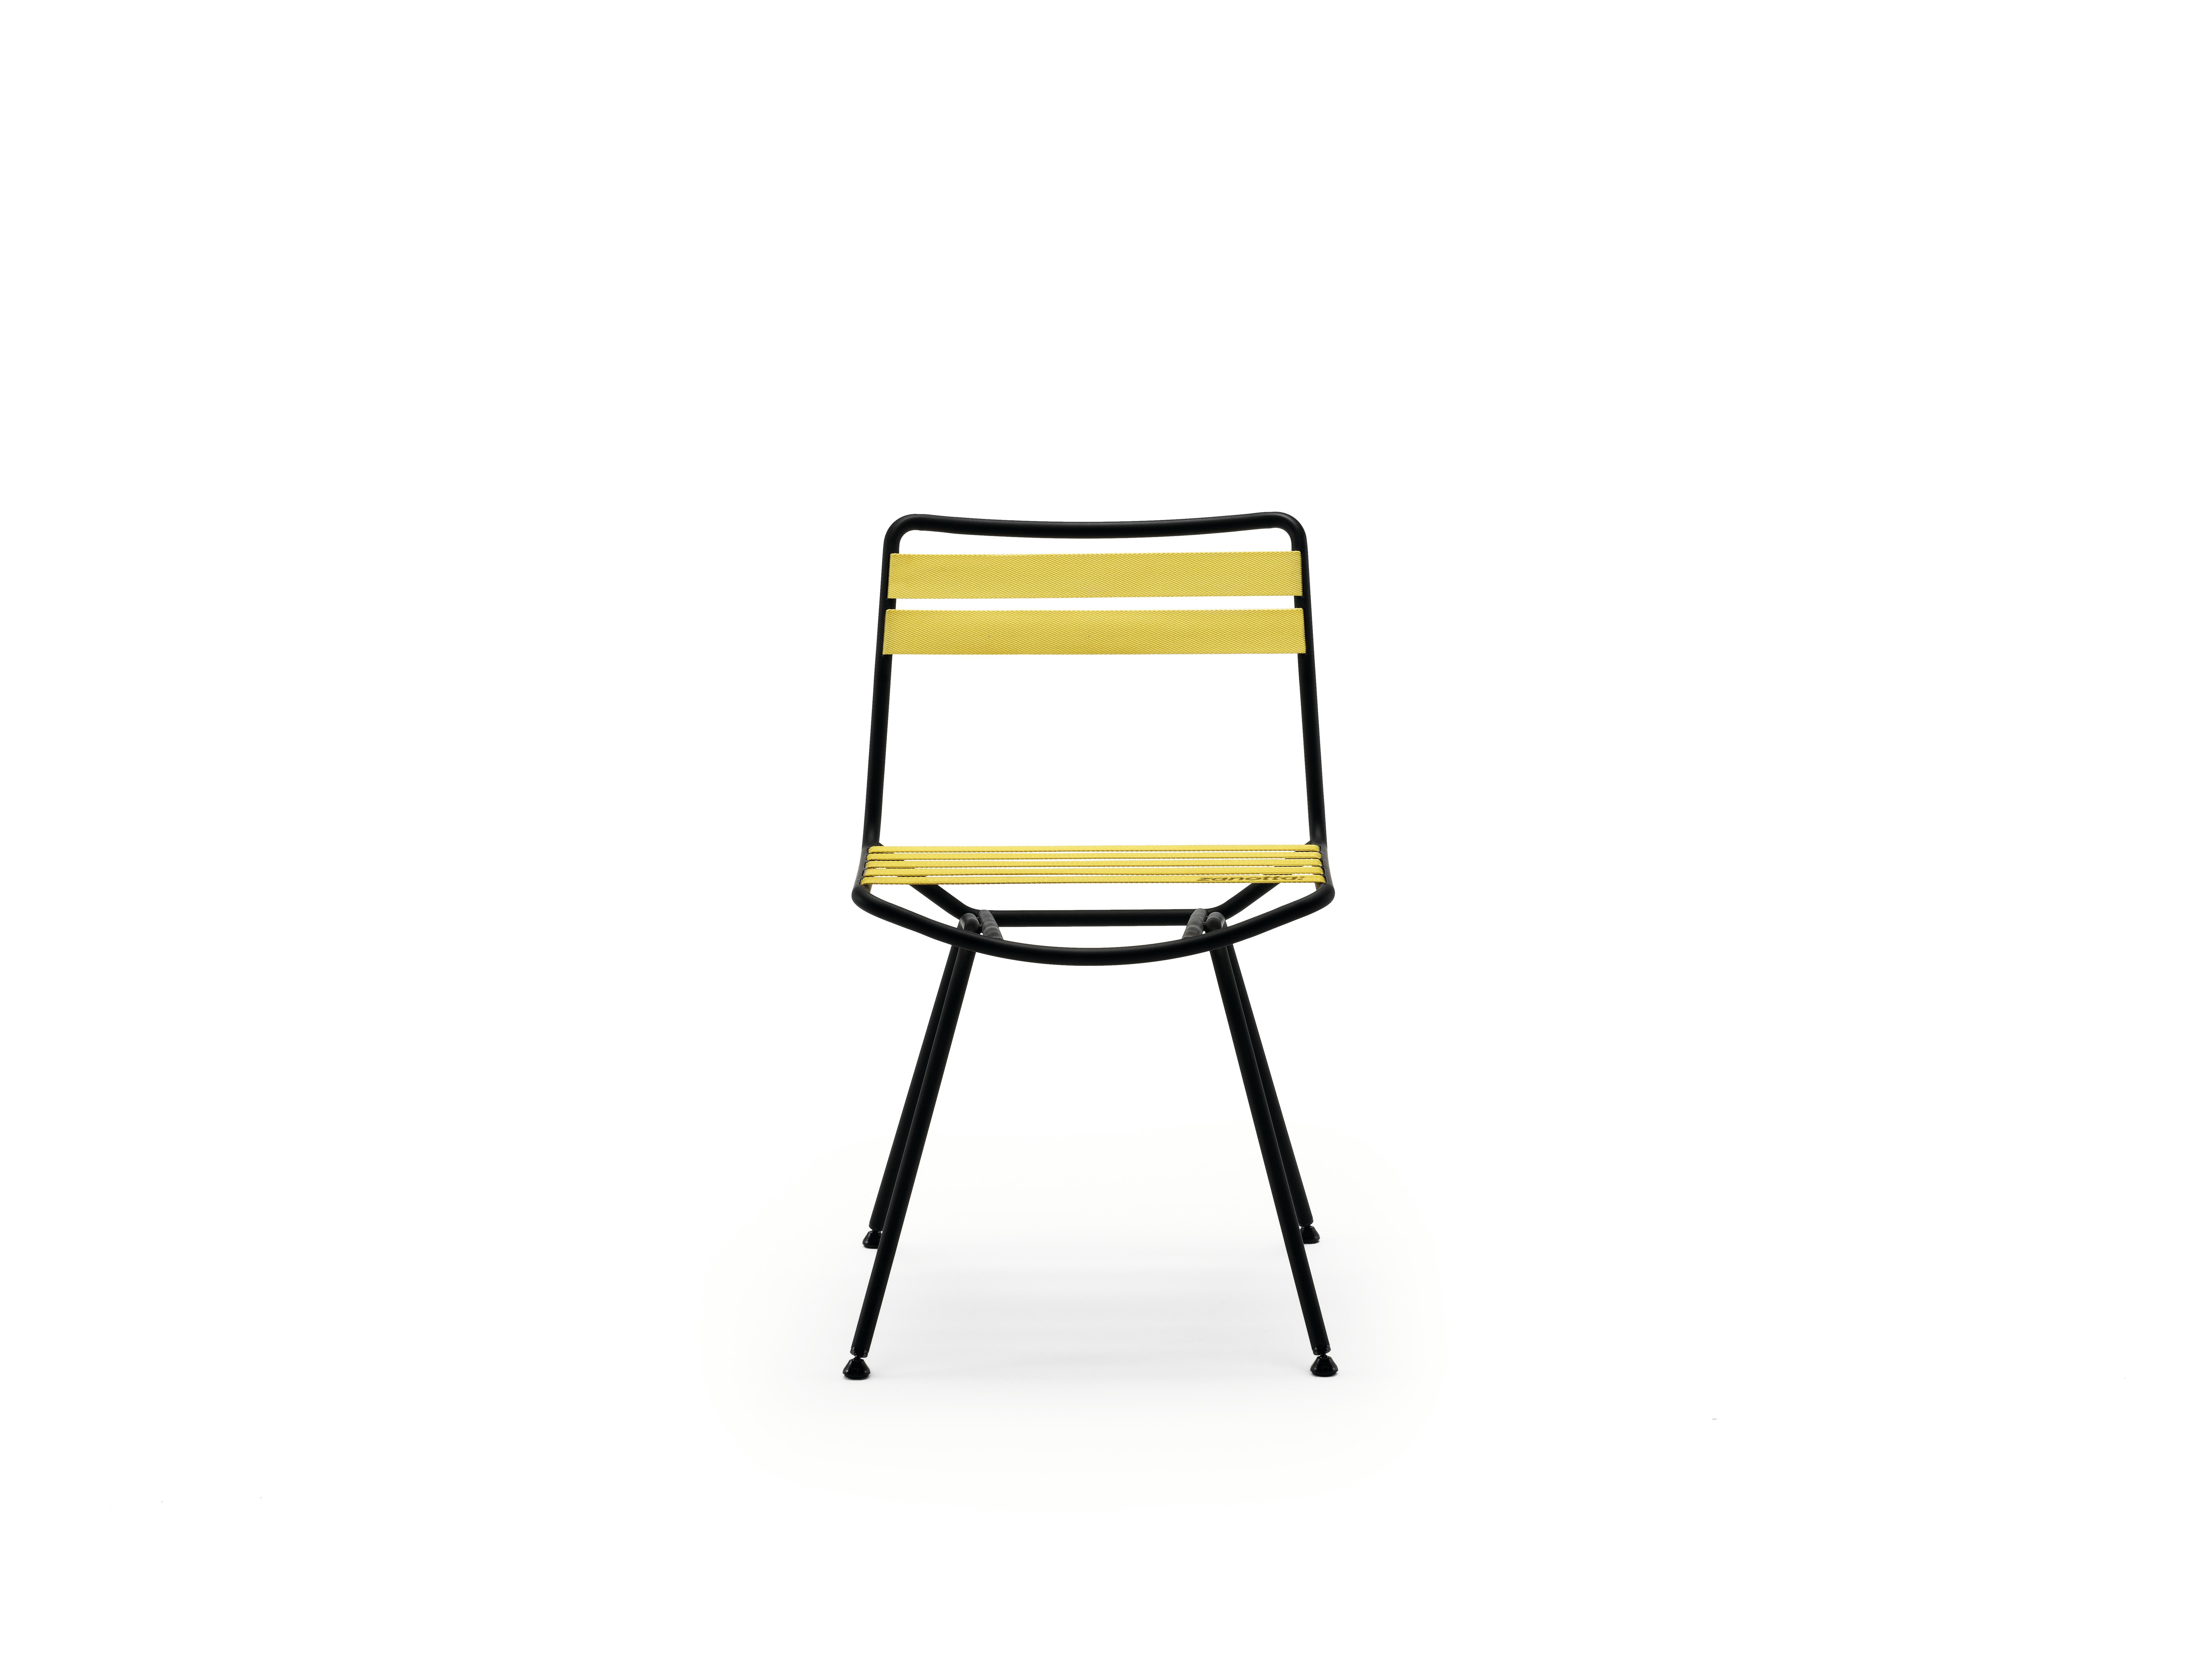 Zanotta Dan Chair in Yellow Elastic Seat & Back with Matt Black Steel Frame by Patrick Norguet

Steel frame varnished iron grey or matt black. Seat and backrest made of elastic straps in polyester thread available in yellow, string, anthracite and